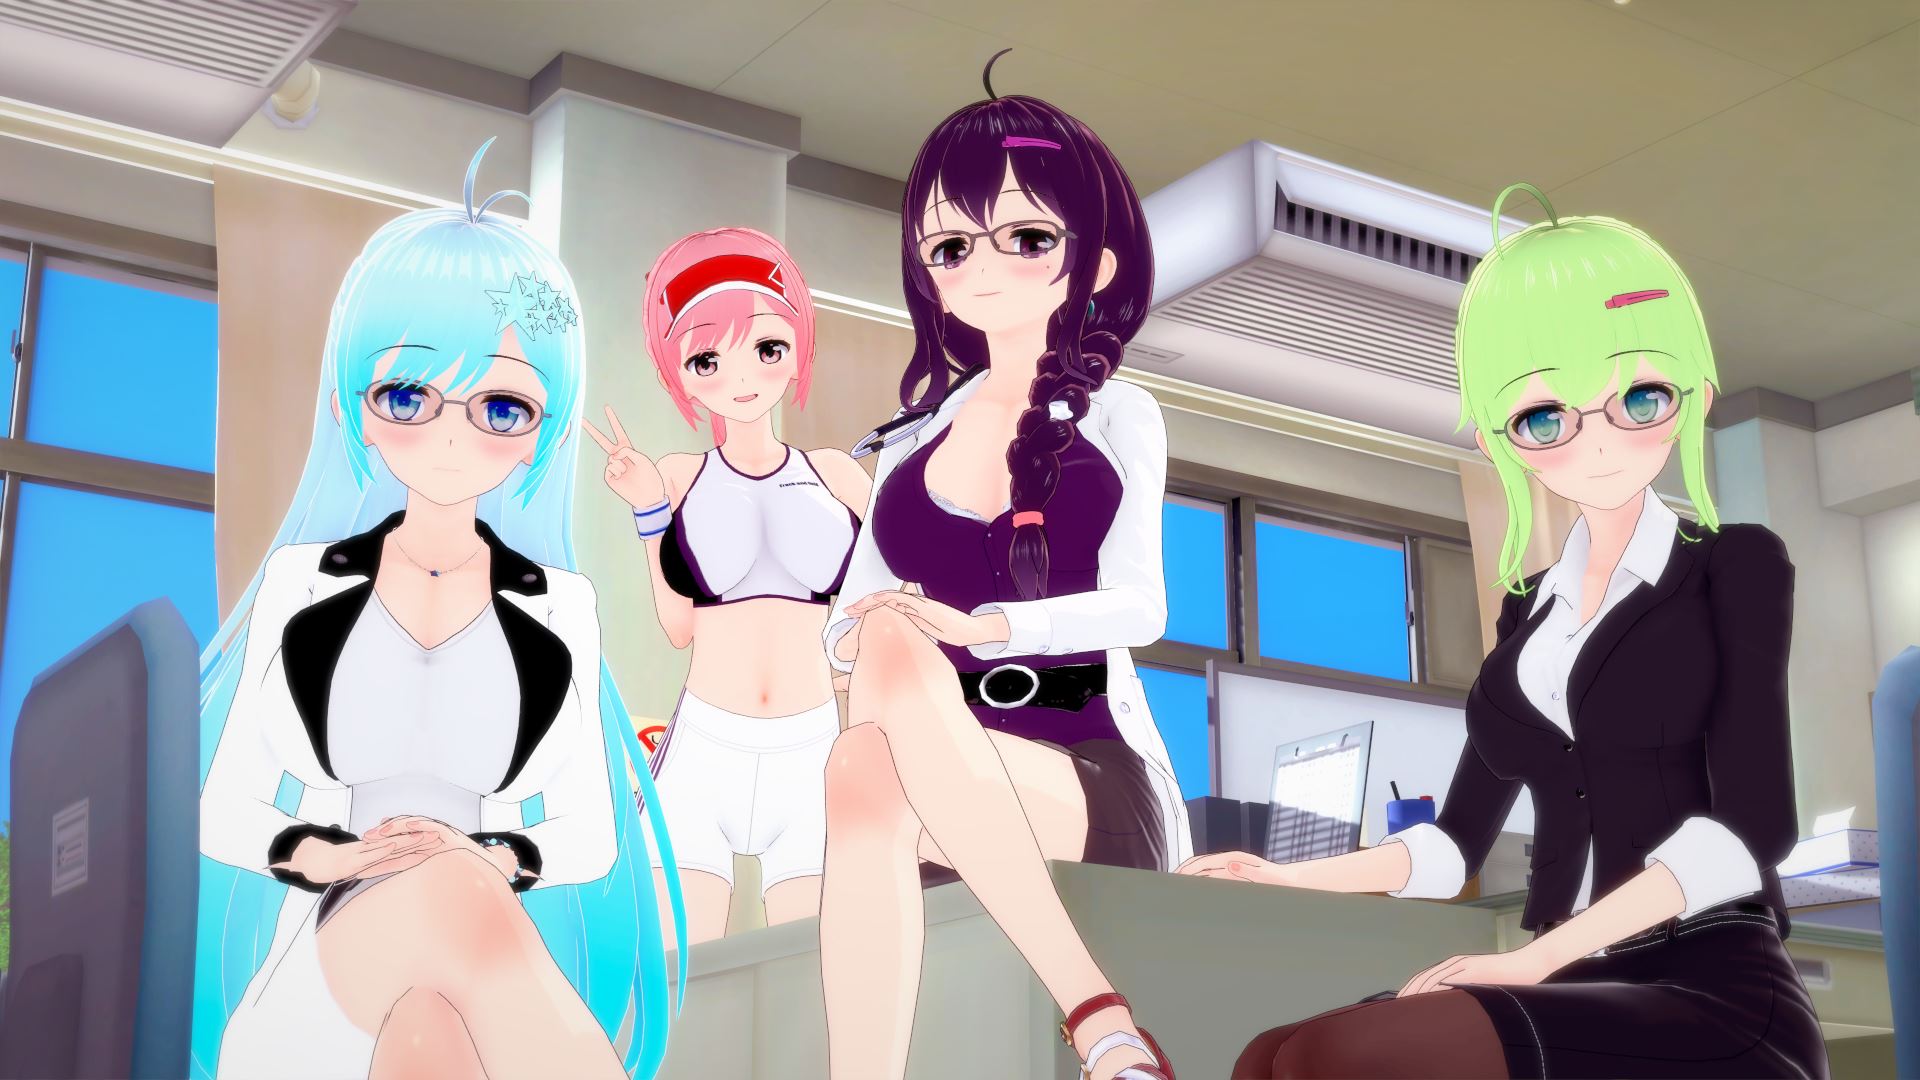 Skul Xx Dawnlod - School Tales Ren'Py Porn Sex Game v.2.2 Download for Windows, MacOS, Linux,  Android